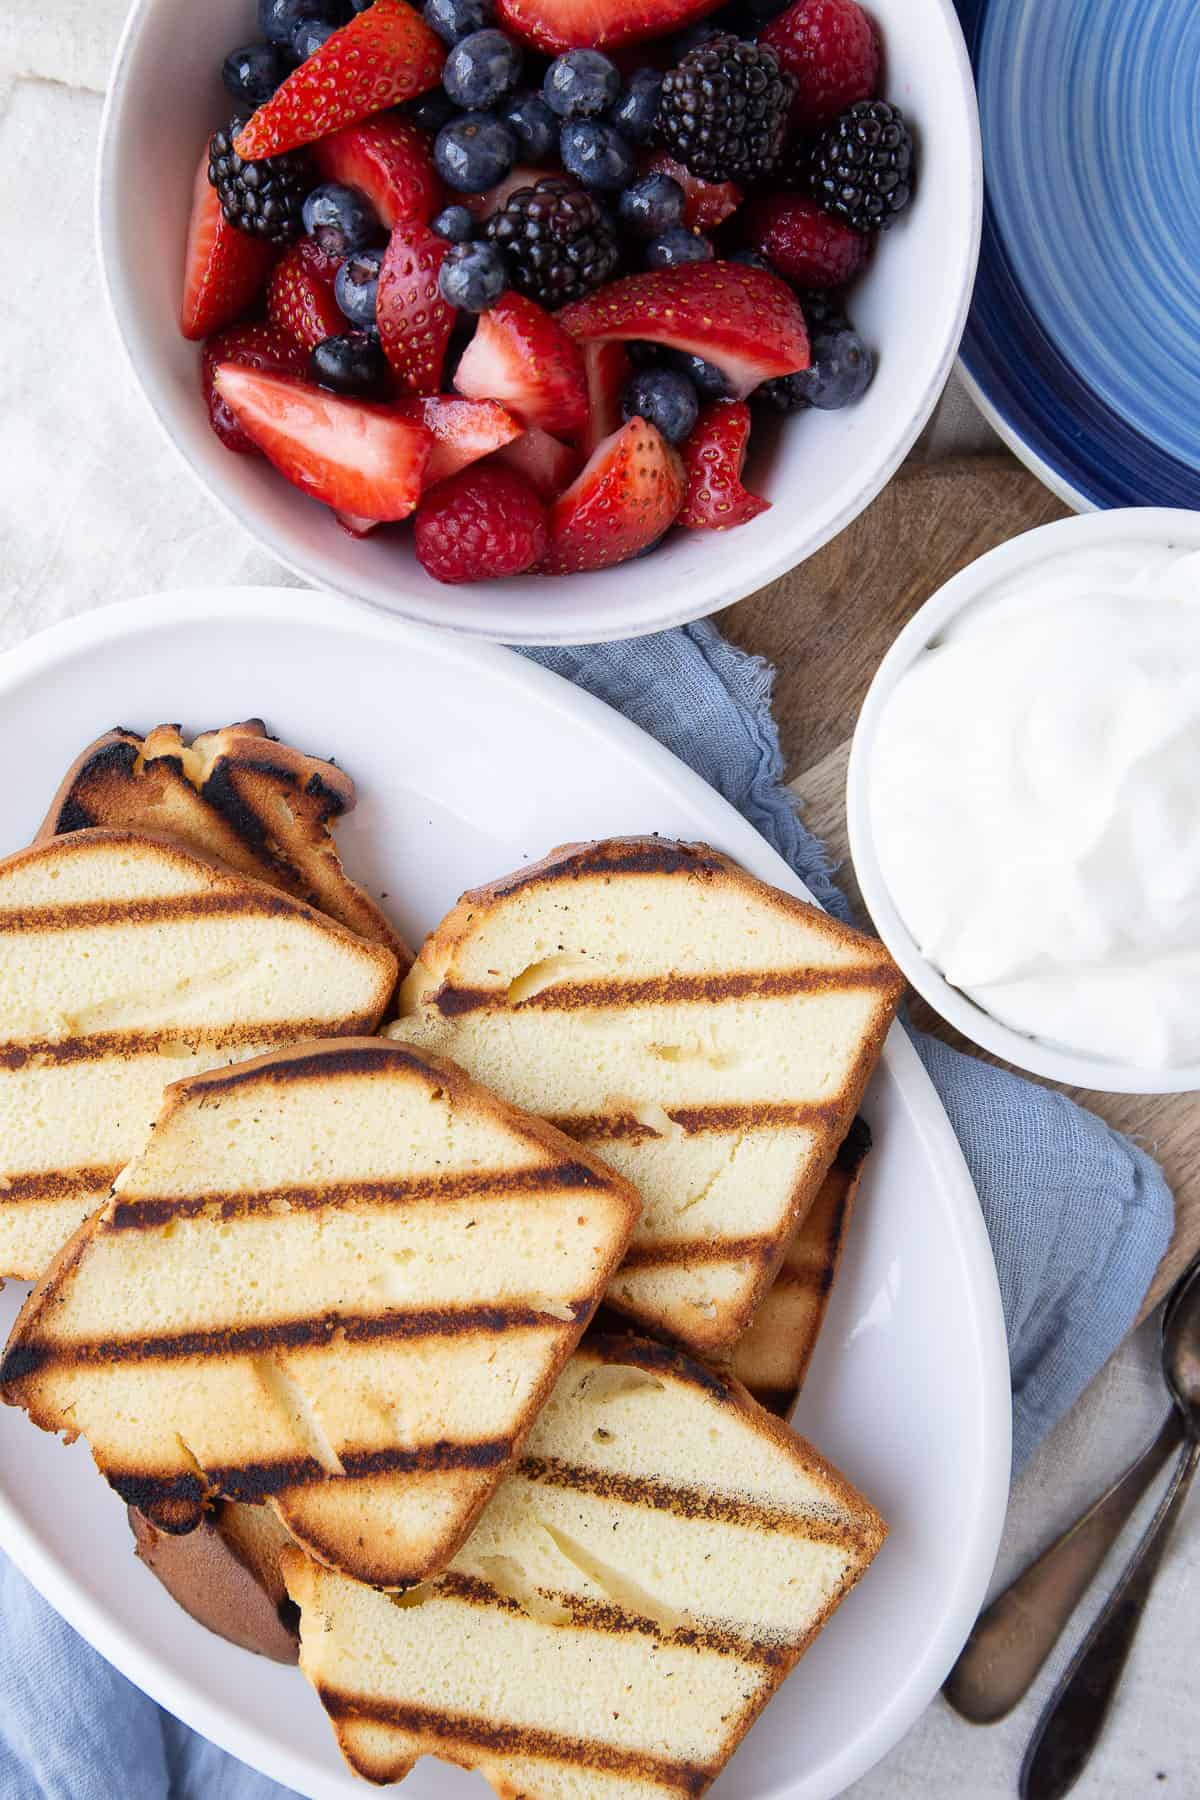 slices of grilled pound cake on a white platter, next to bowls of fresh berries and whipped cream.